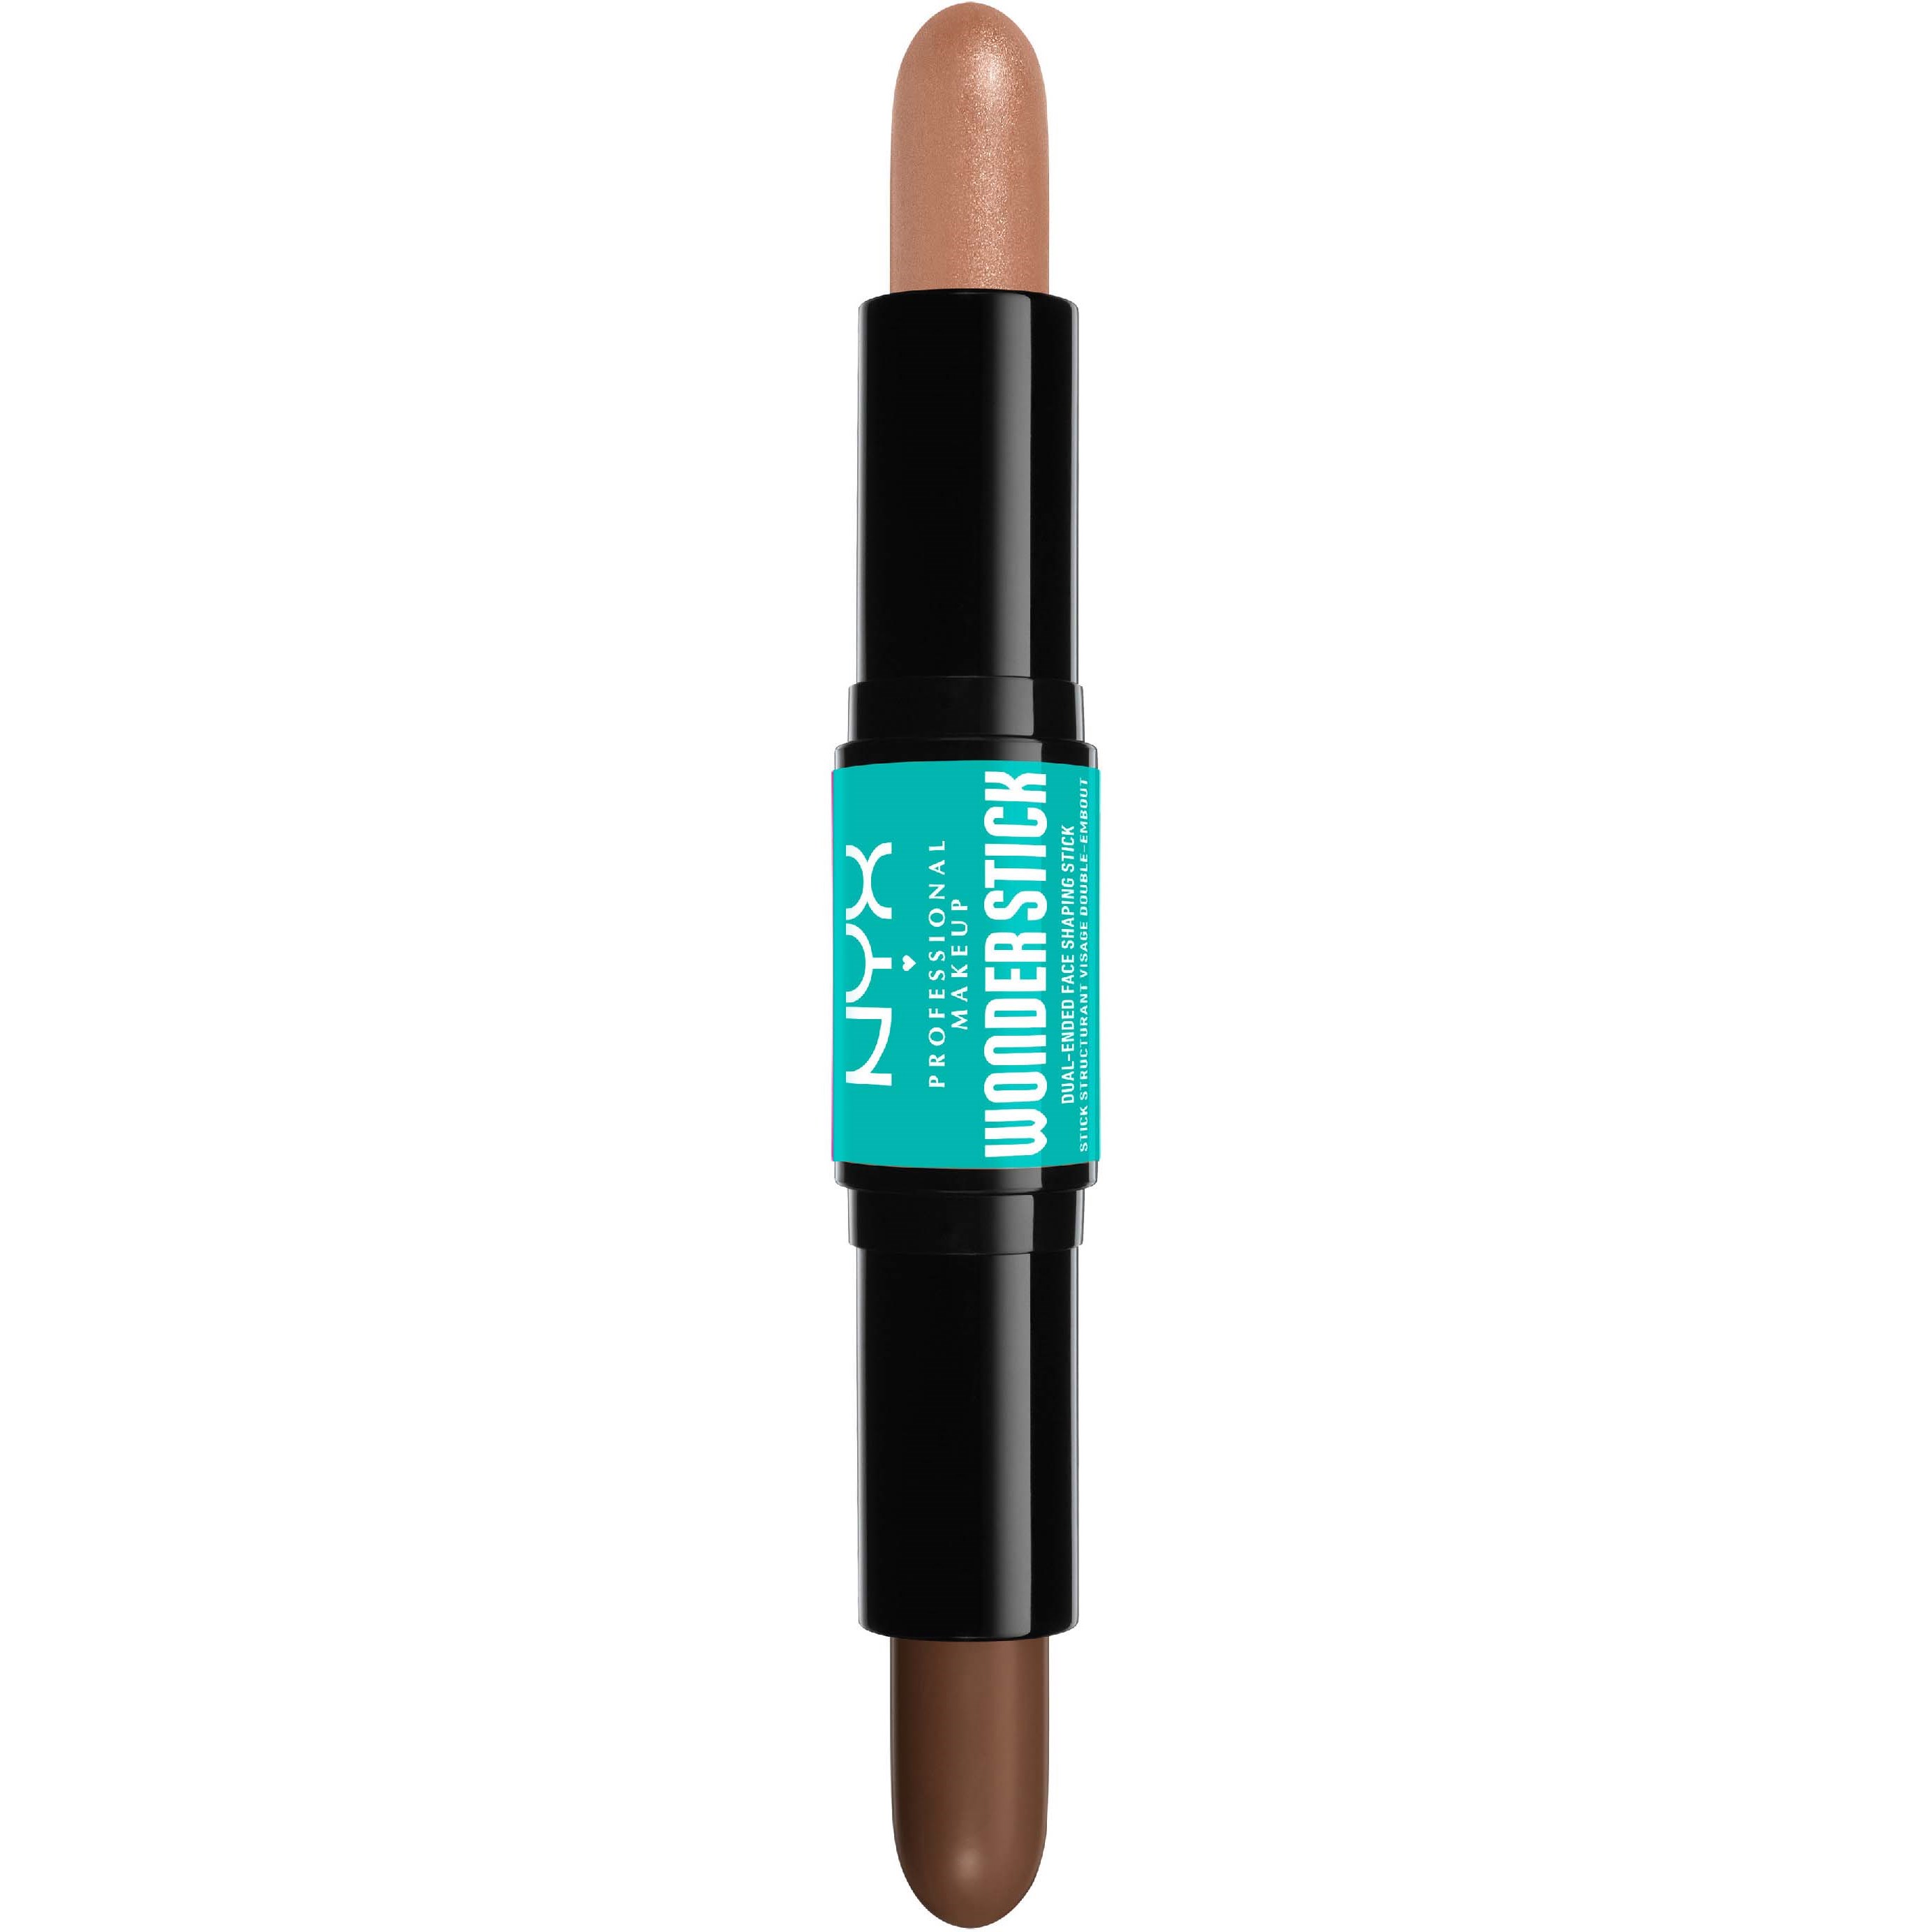 Läs mer om NYX PROFESSIONAL MAKEUP Wonder Stick Dual-Ended Face Shaping Stick 04